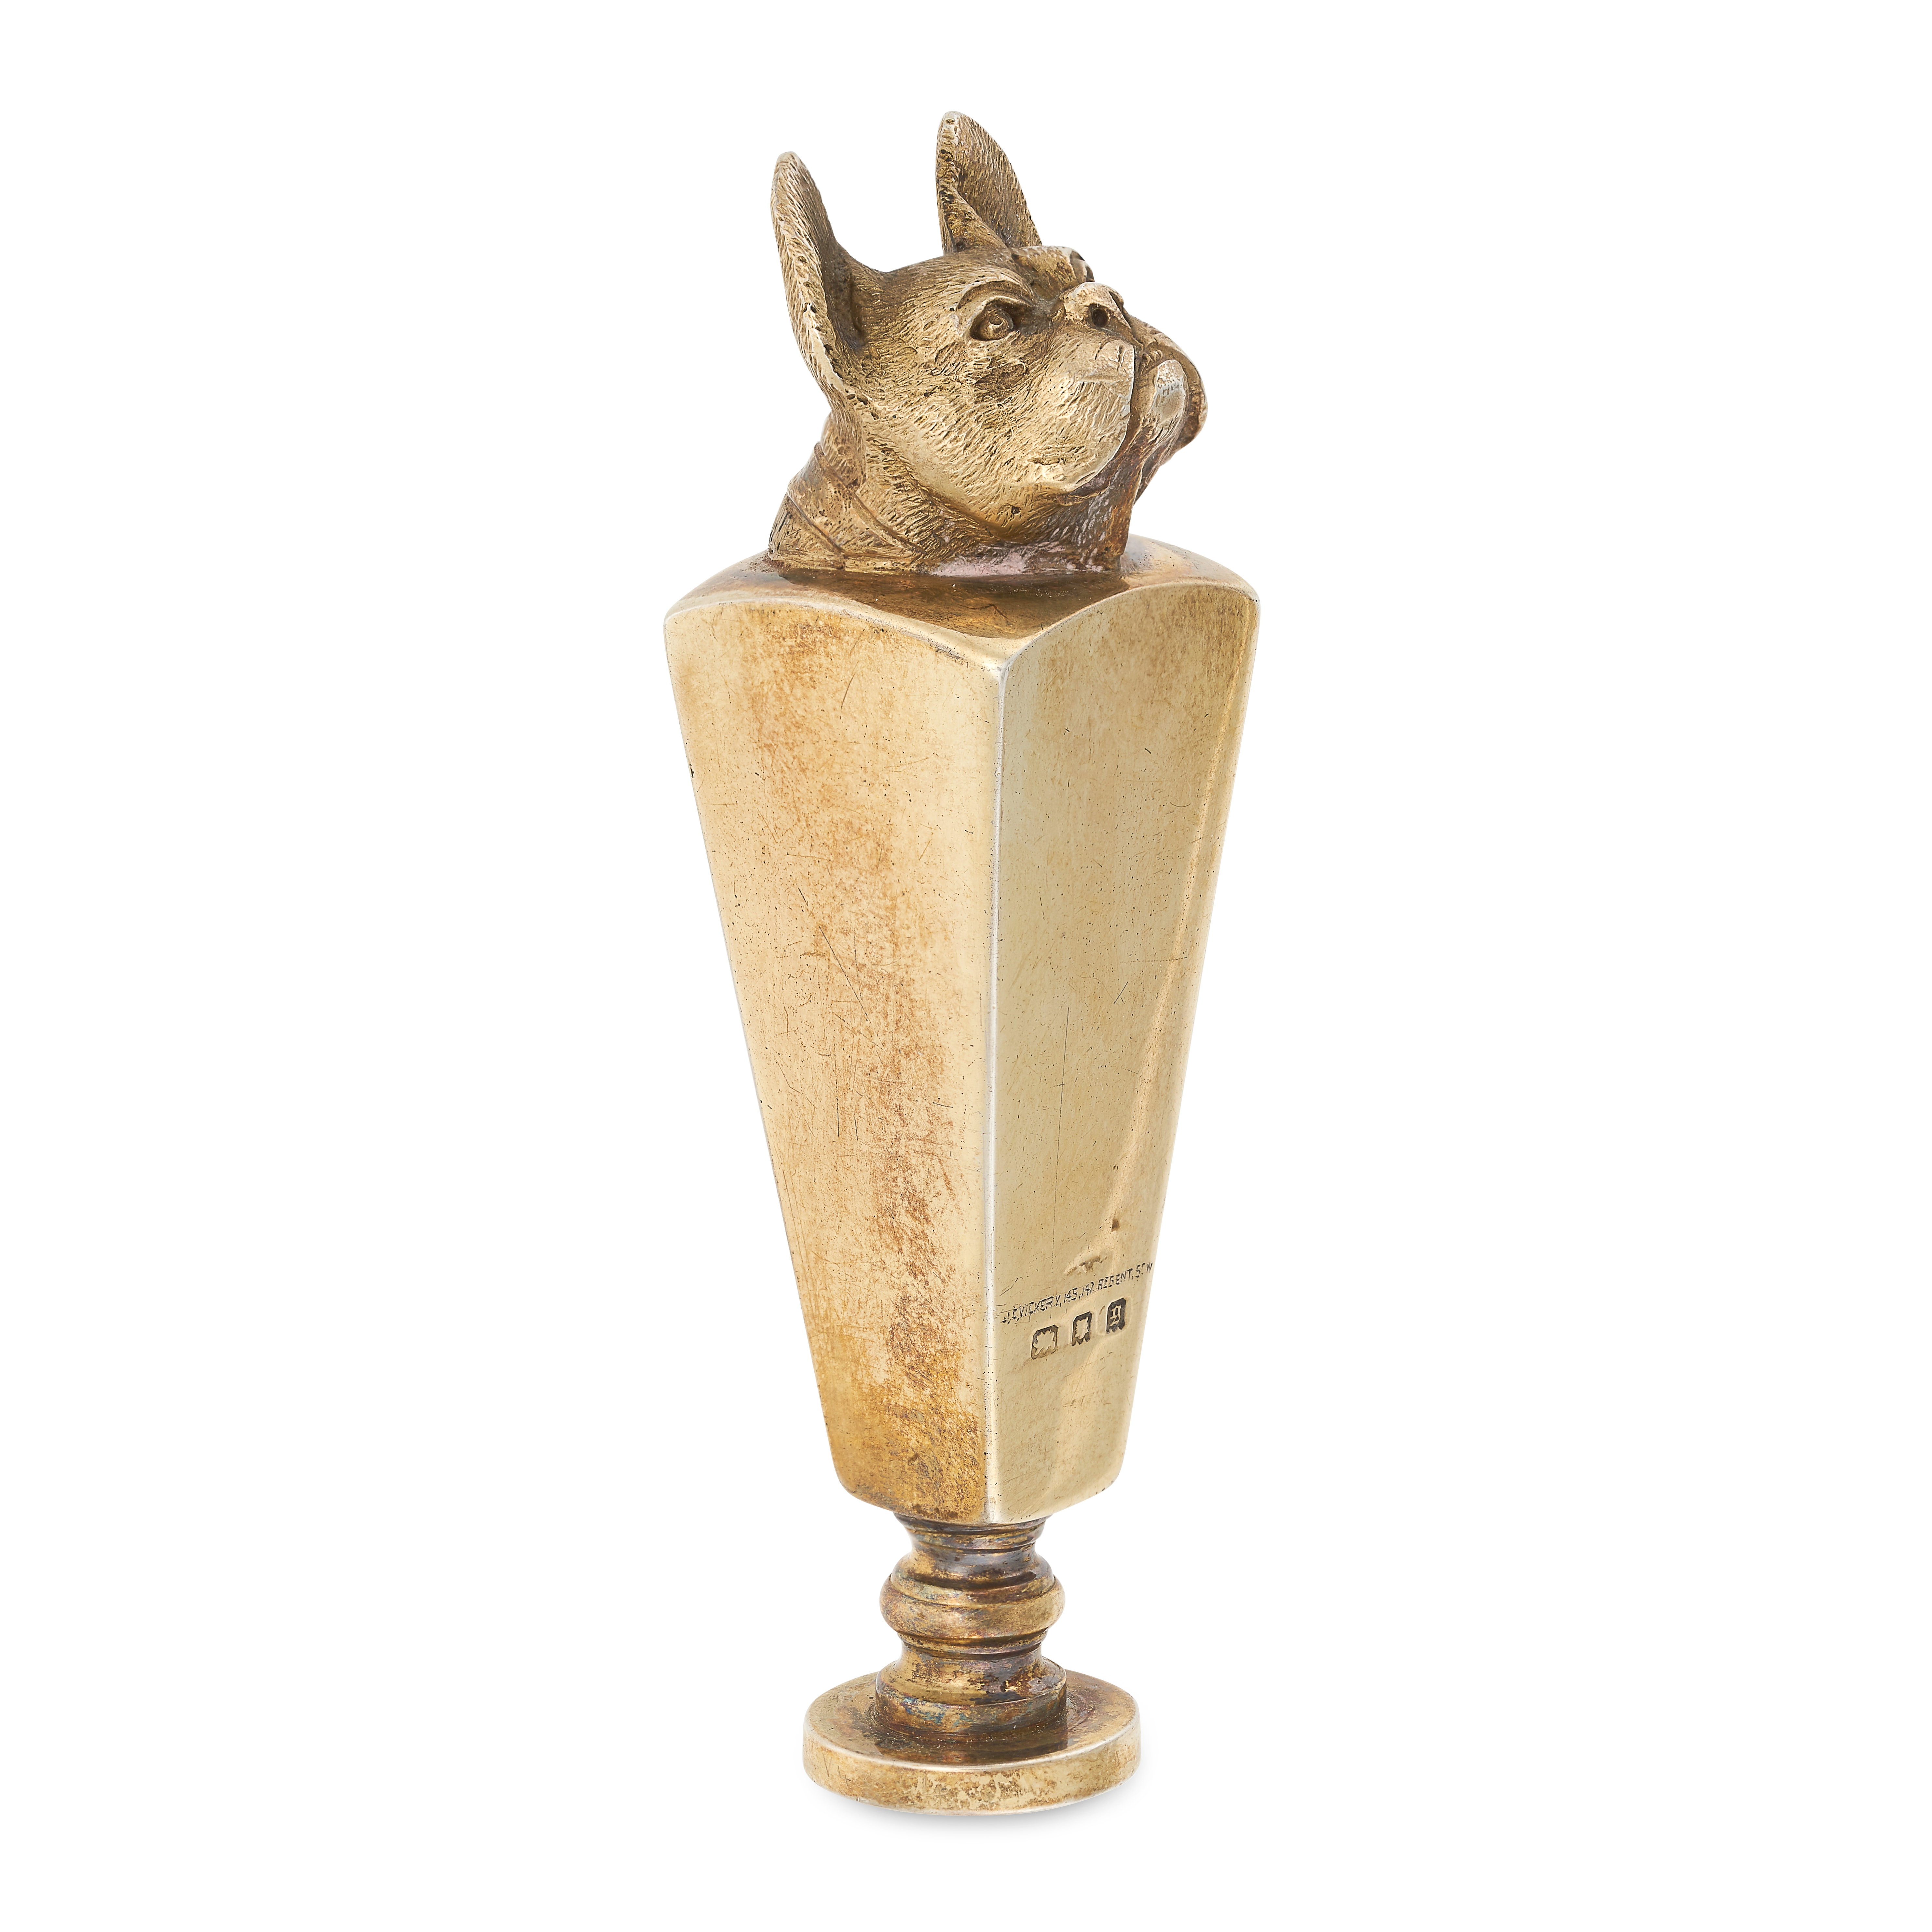 NO RESERVE - J C VICKERY, AN ANTIQUE FRENCH BULLDOG HAND SEAL, 1922 in gilded silver, with the crest - Image 2 of 4